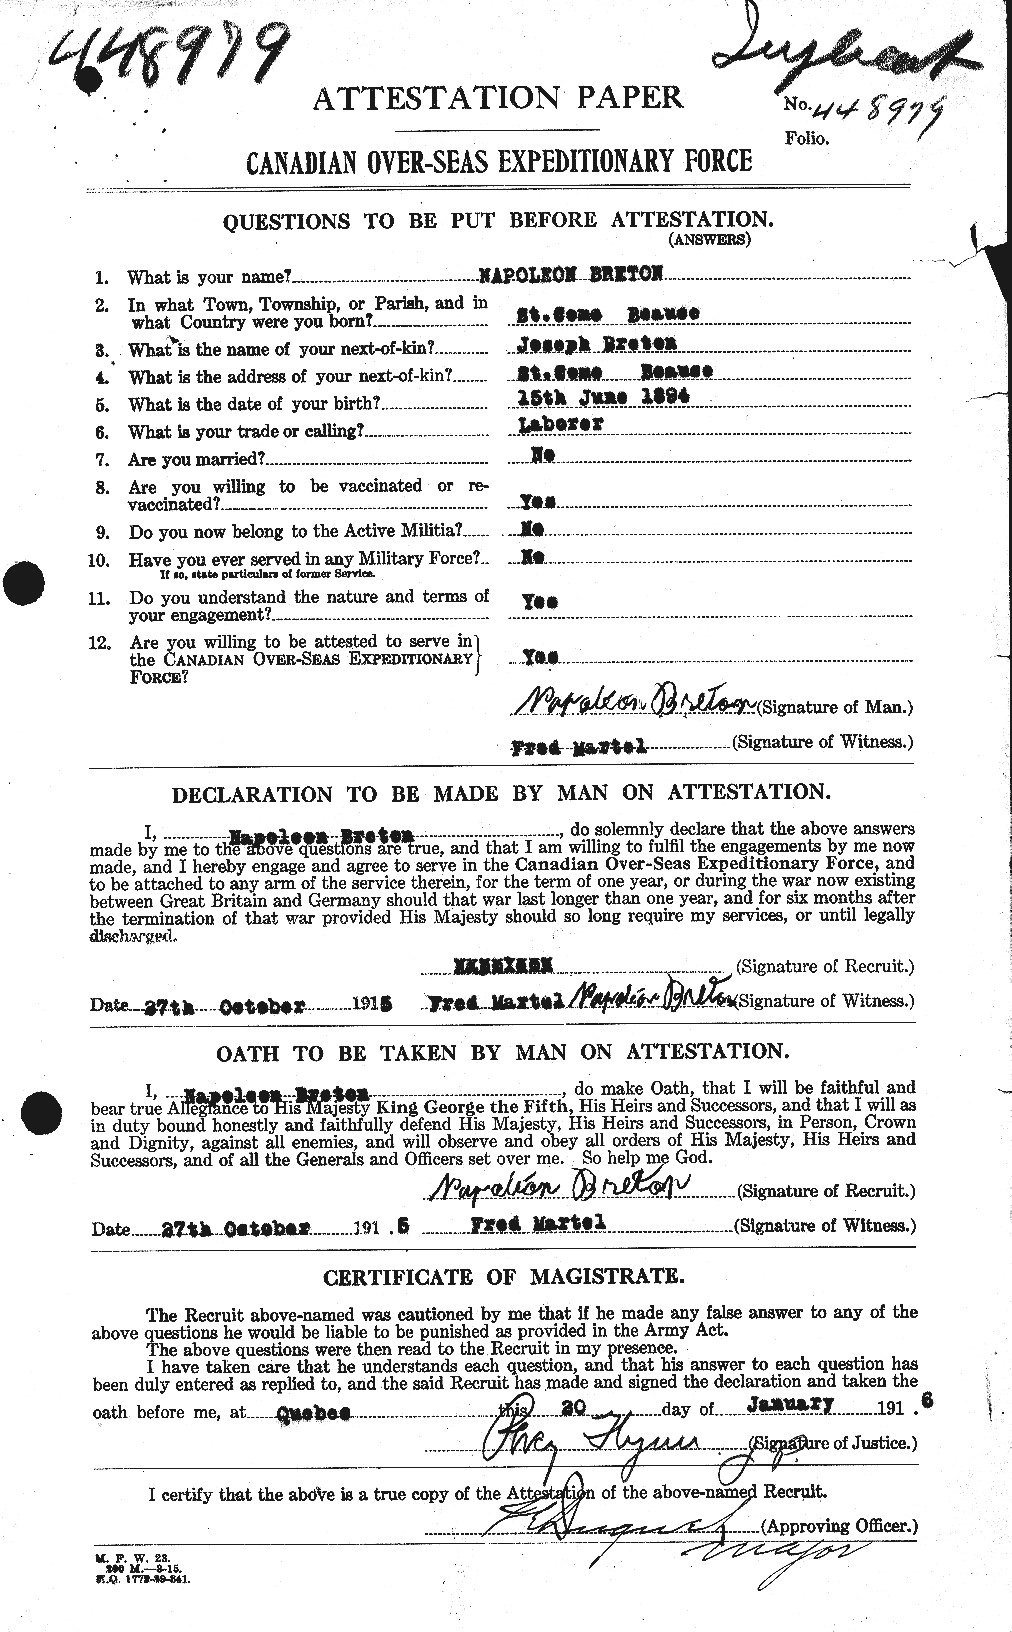 Personnel Records of the First World War - CEF 258797a